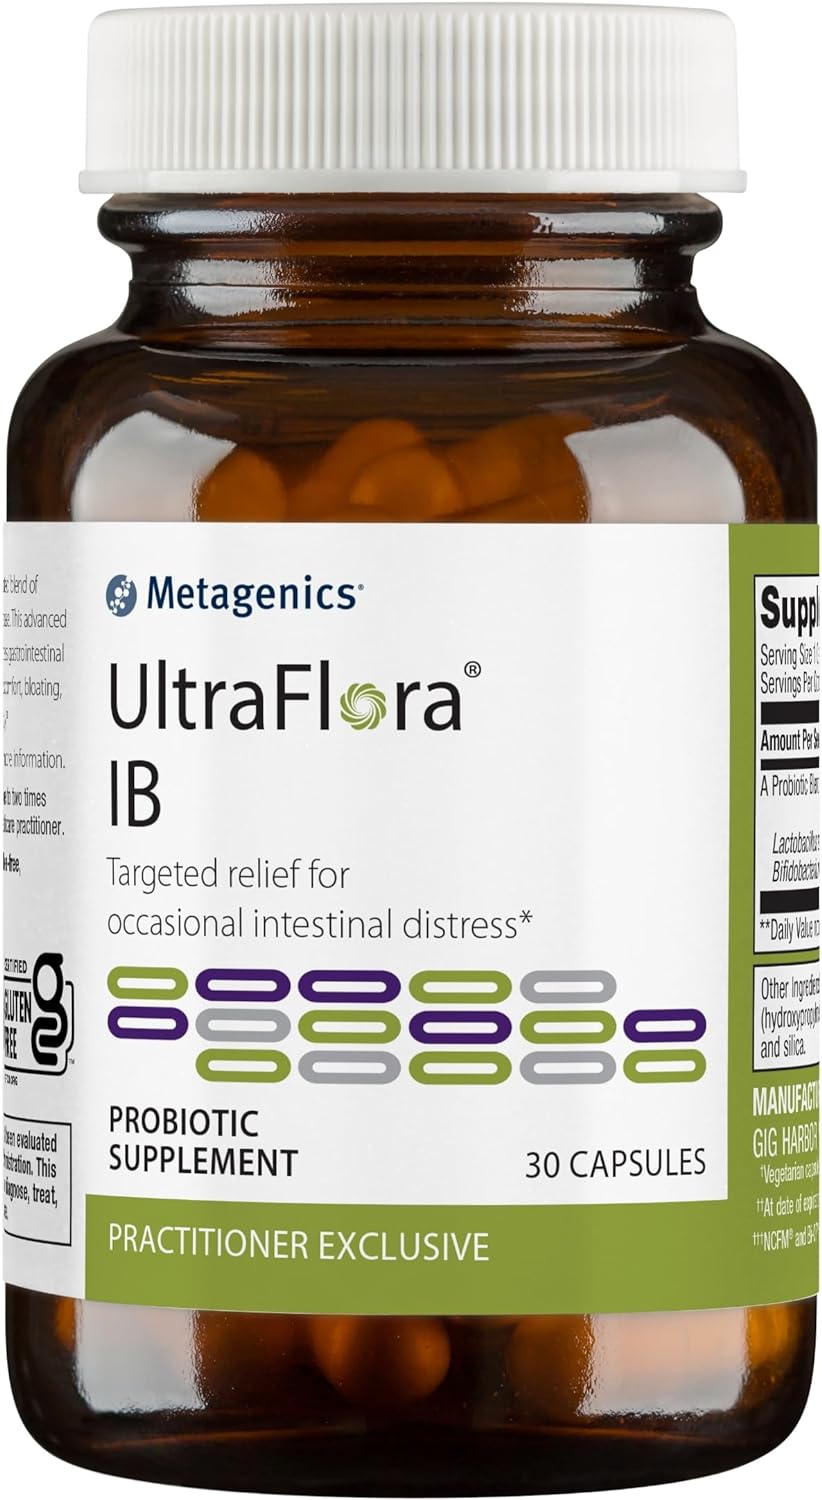 Metagenics UltraFlora IB Daily Probiotic Supplement with Targeted Reli2.88 Ounces